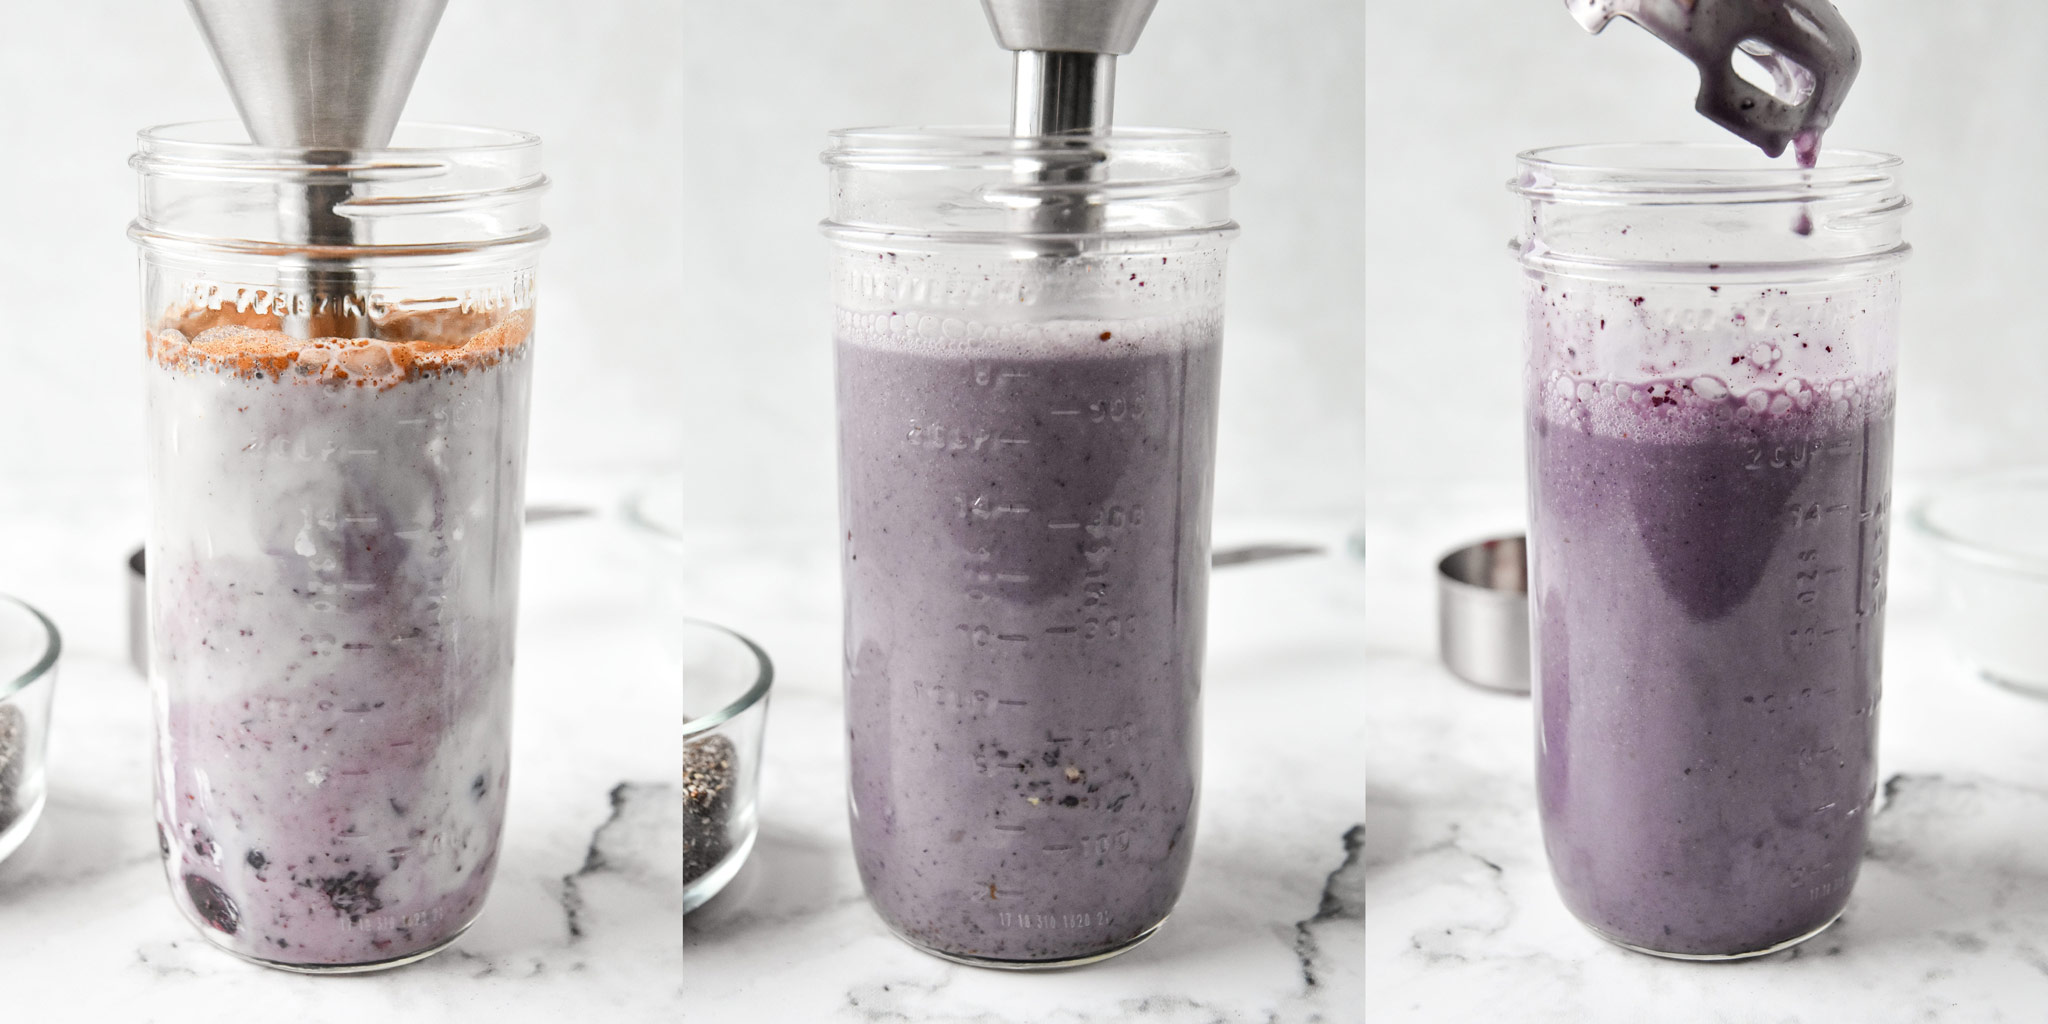 blending up the blueberries and milk for the chia pudding